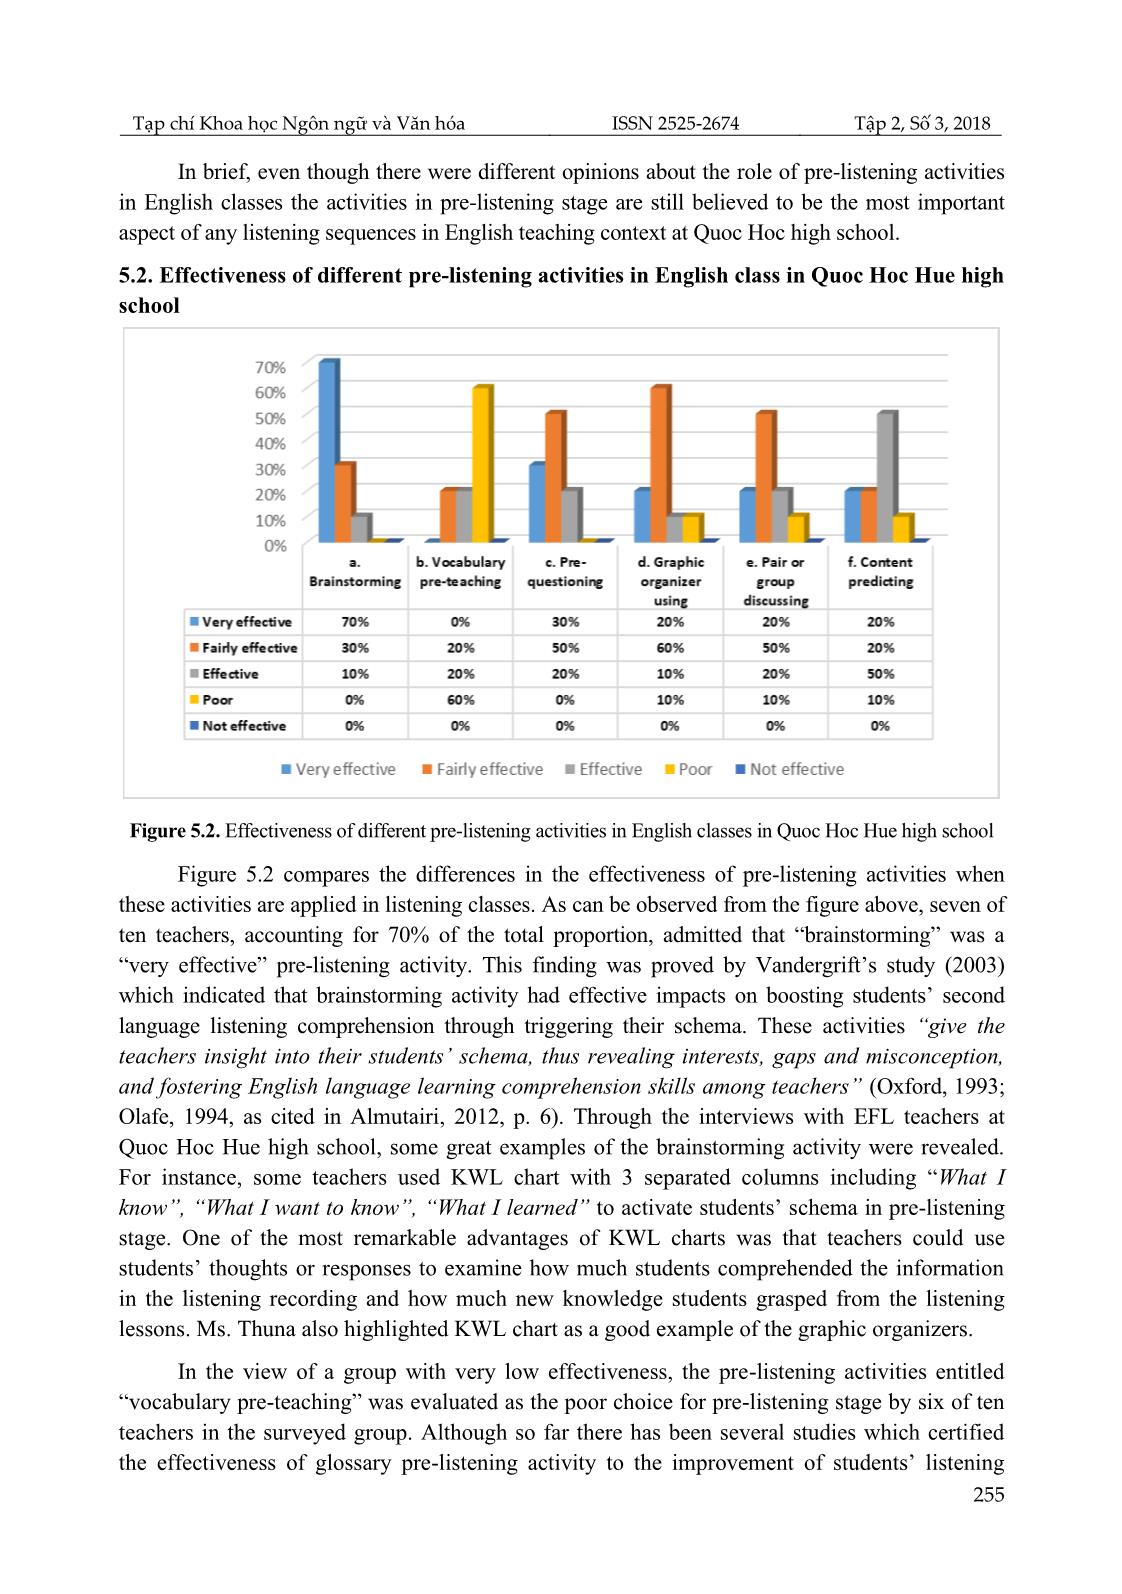 An investigation into efl teachers perceptions and practices of pre-Listening activities in english classes at Quoc Hoc Hue high school trang 7